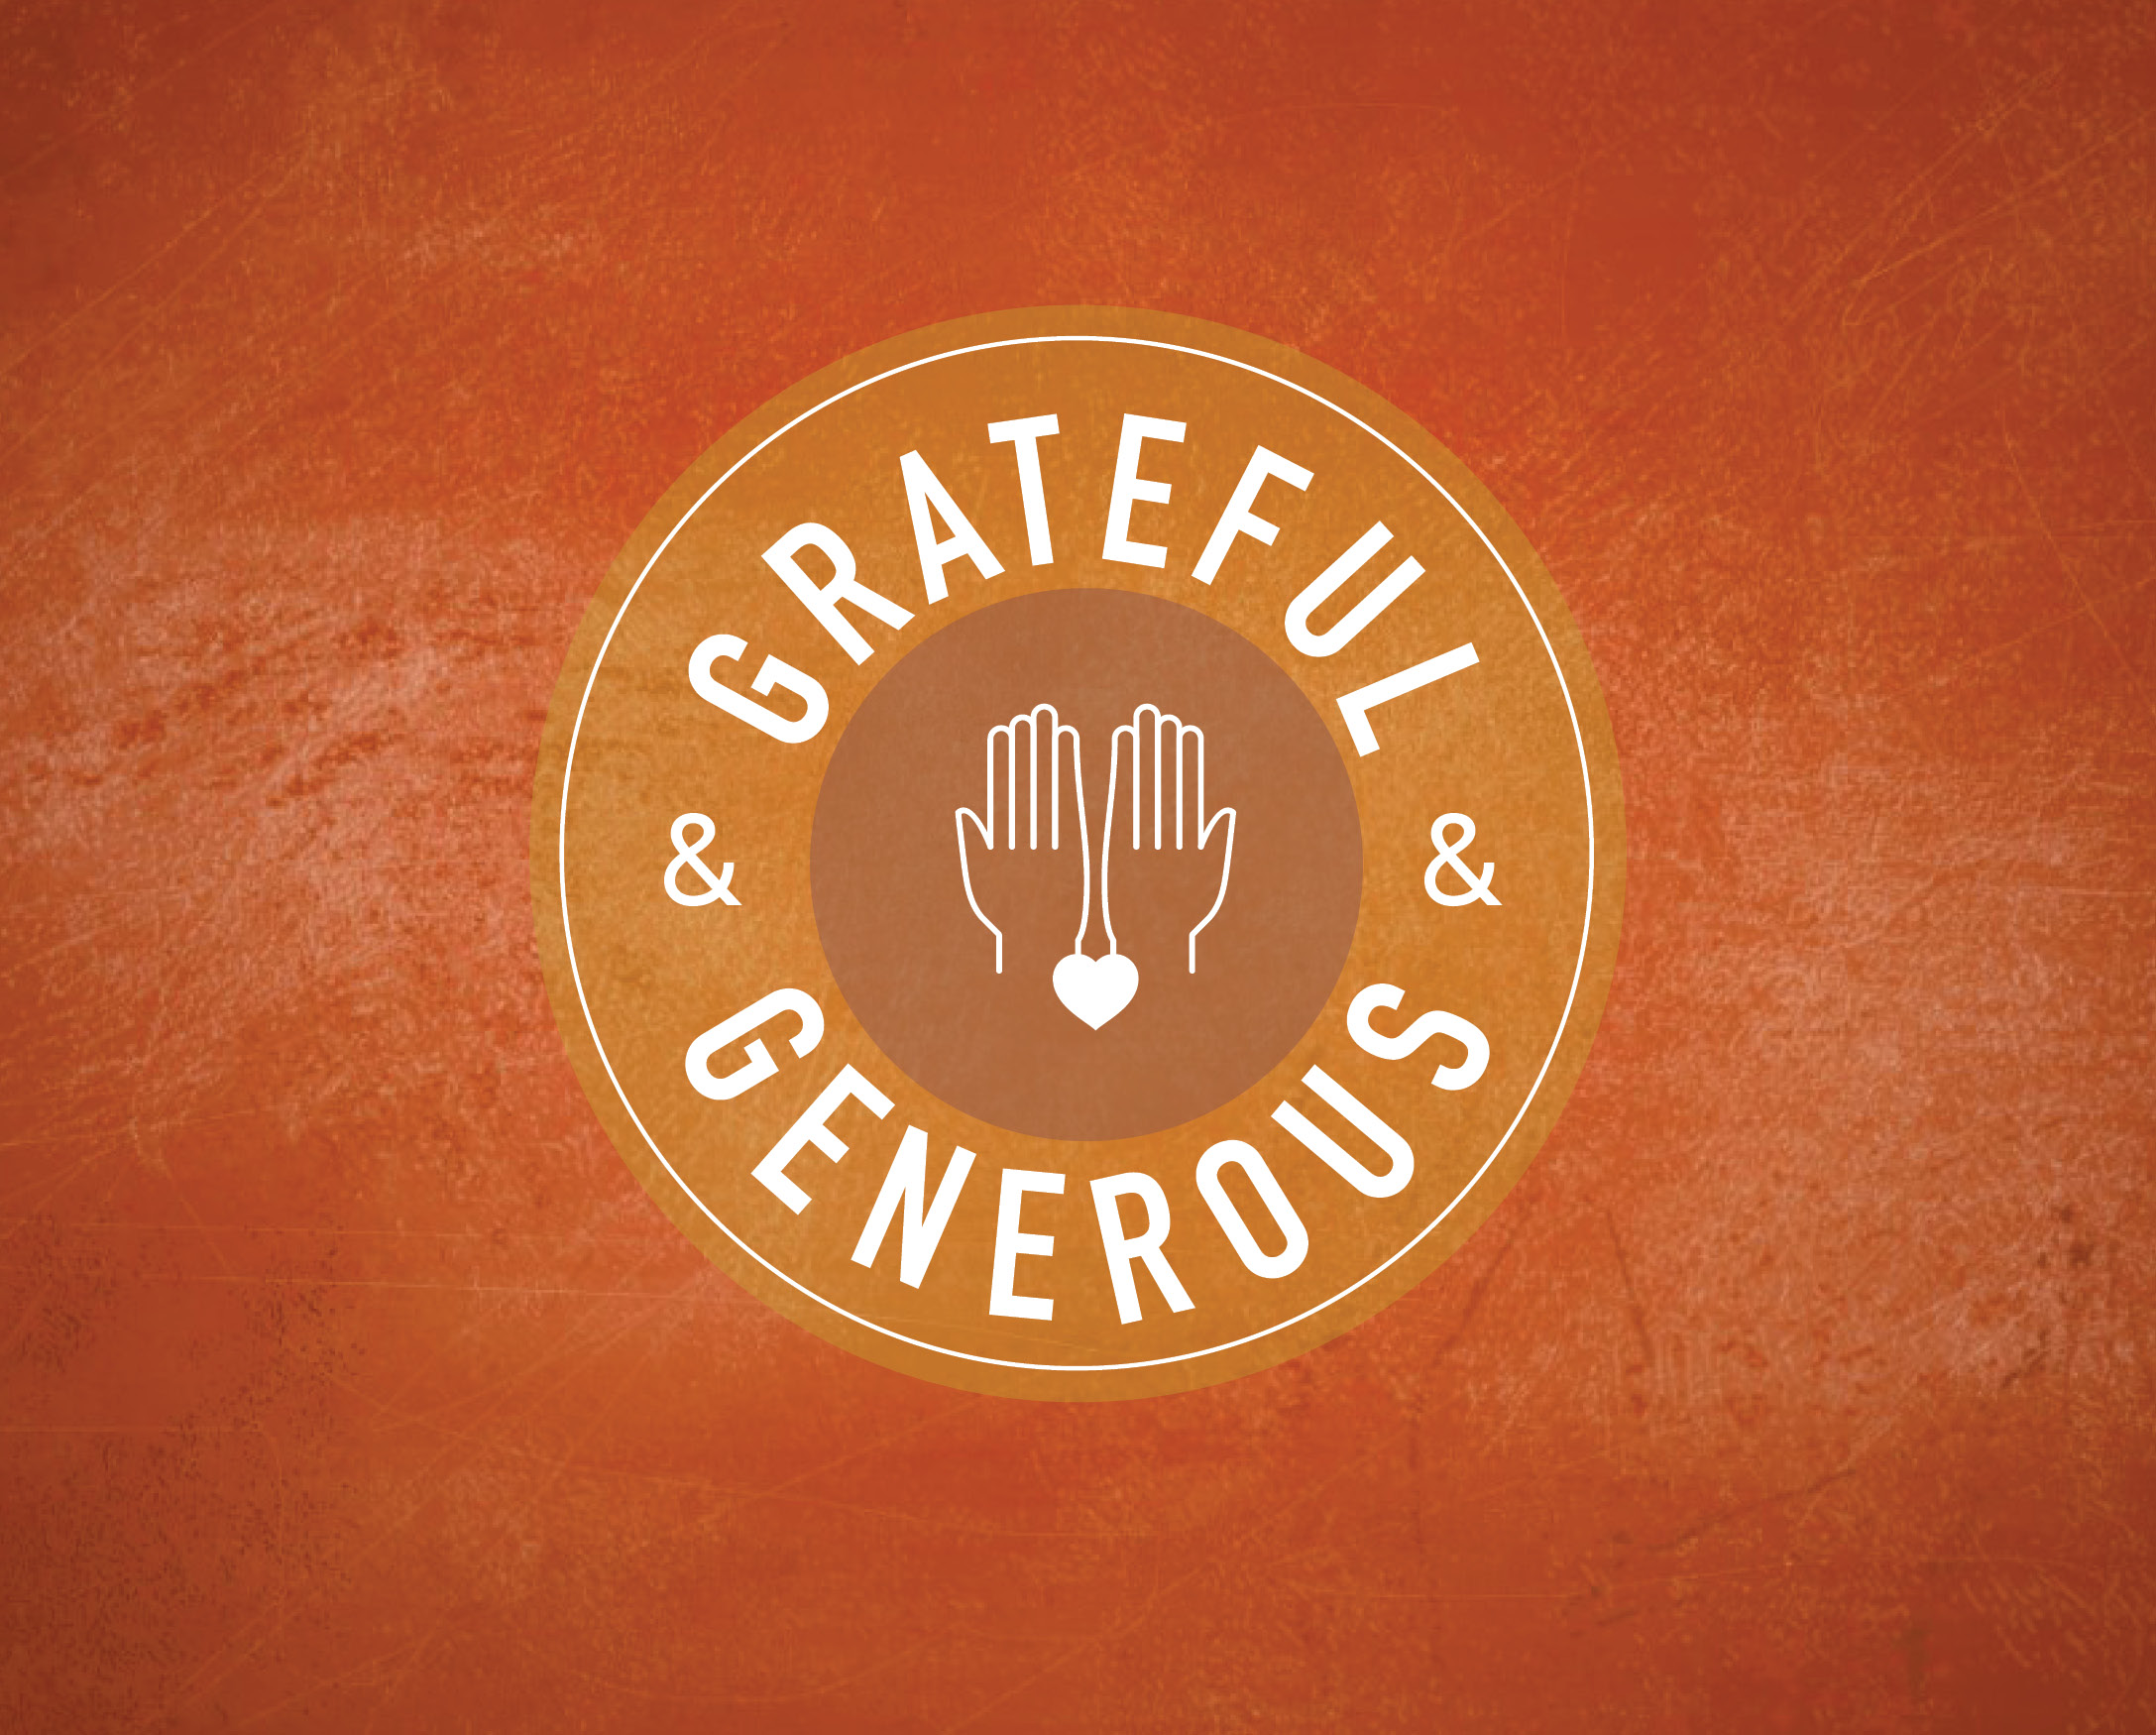 Grateful & Generous: Generous with our Lives